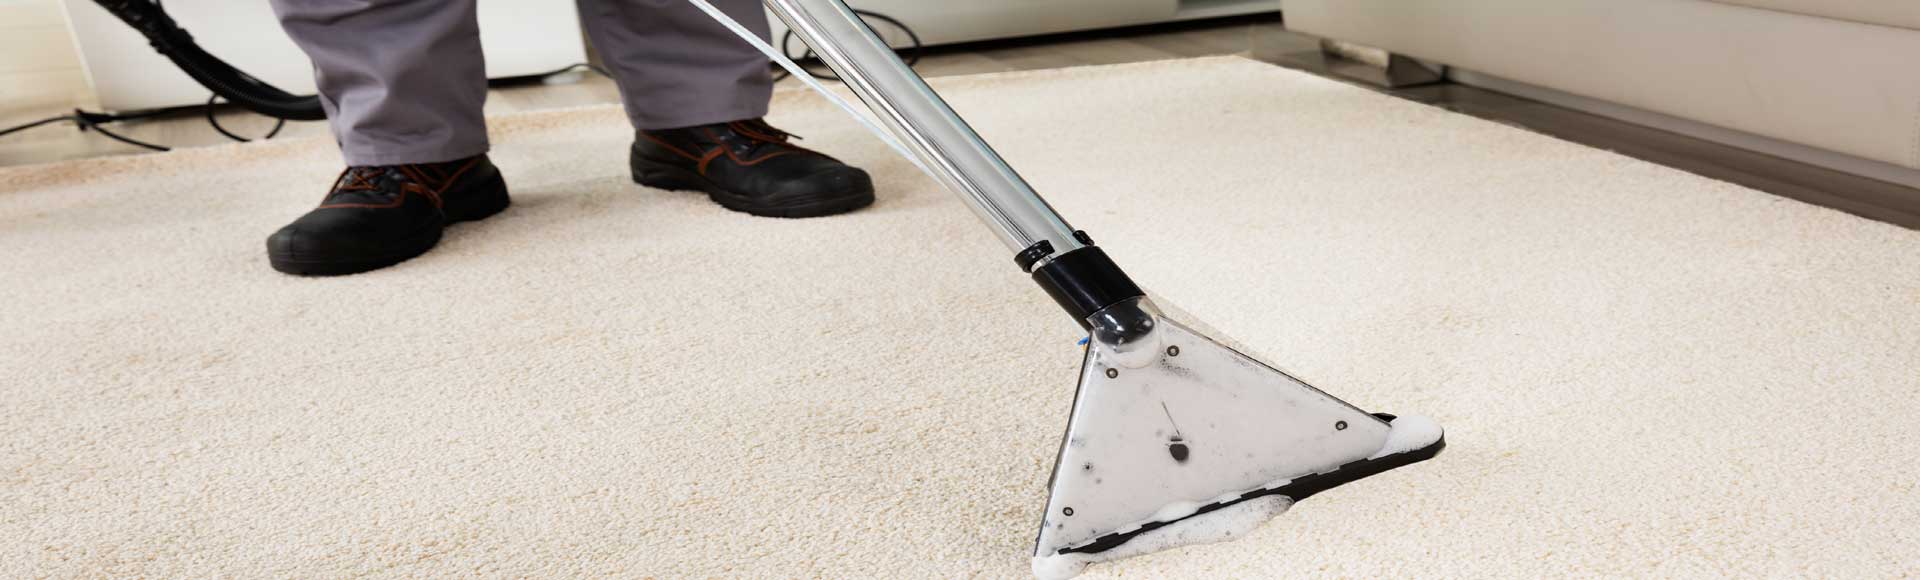 Carpet Cleaning Homes 2 Services